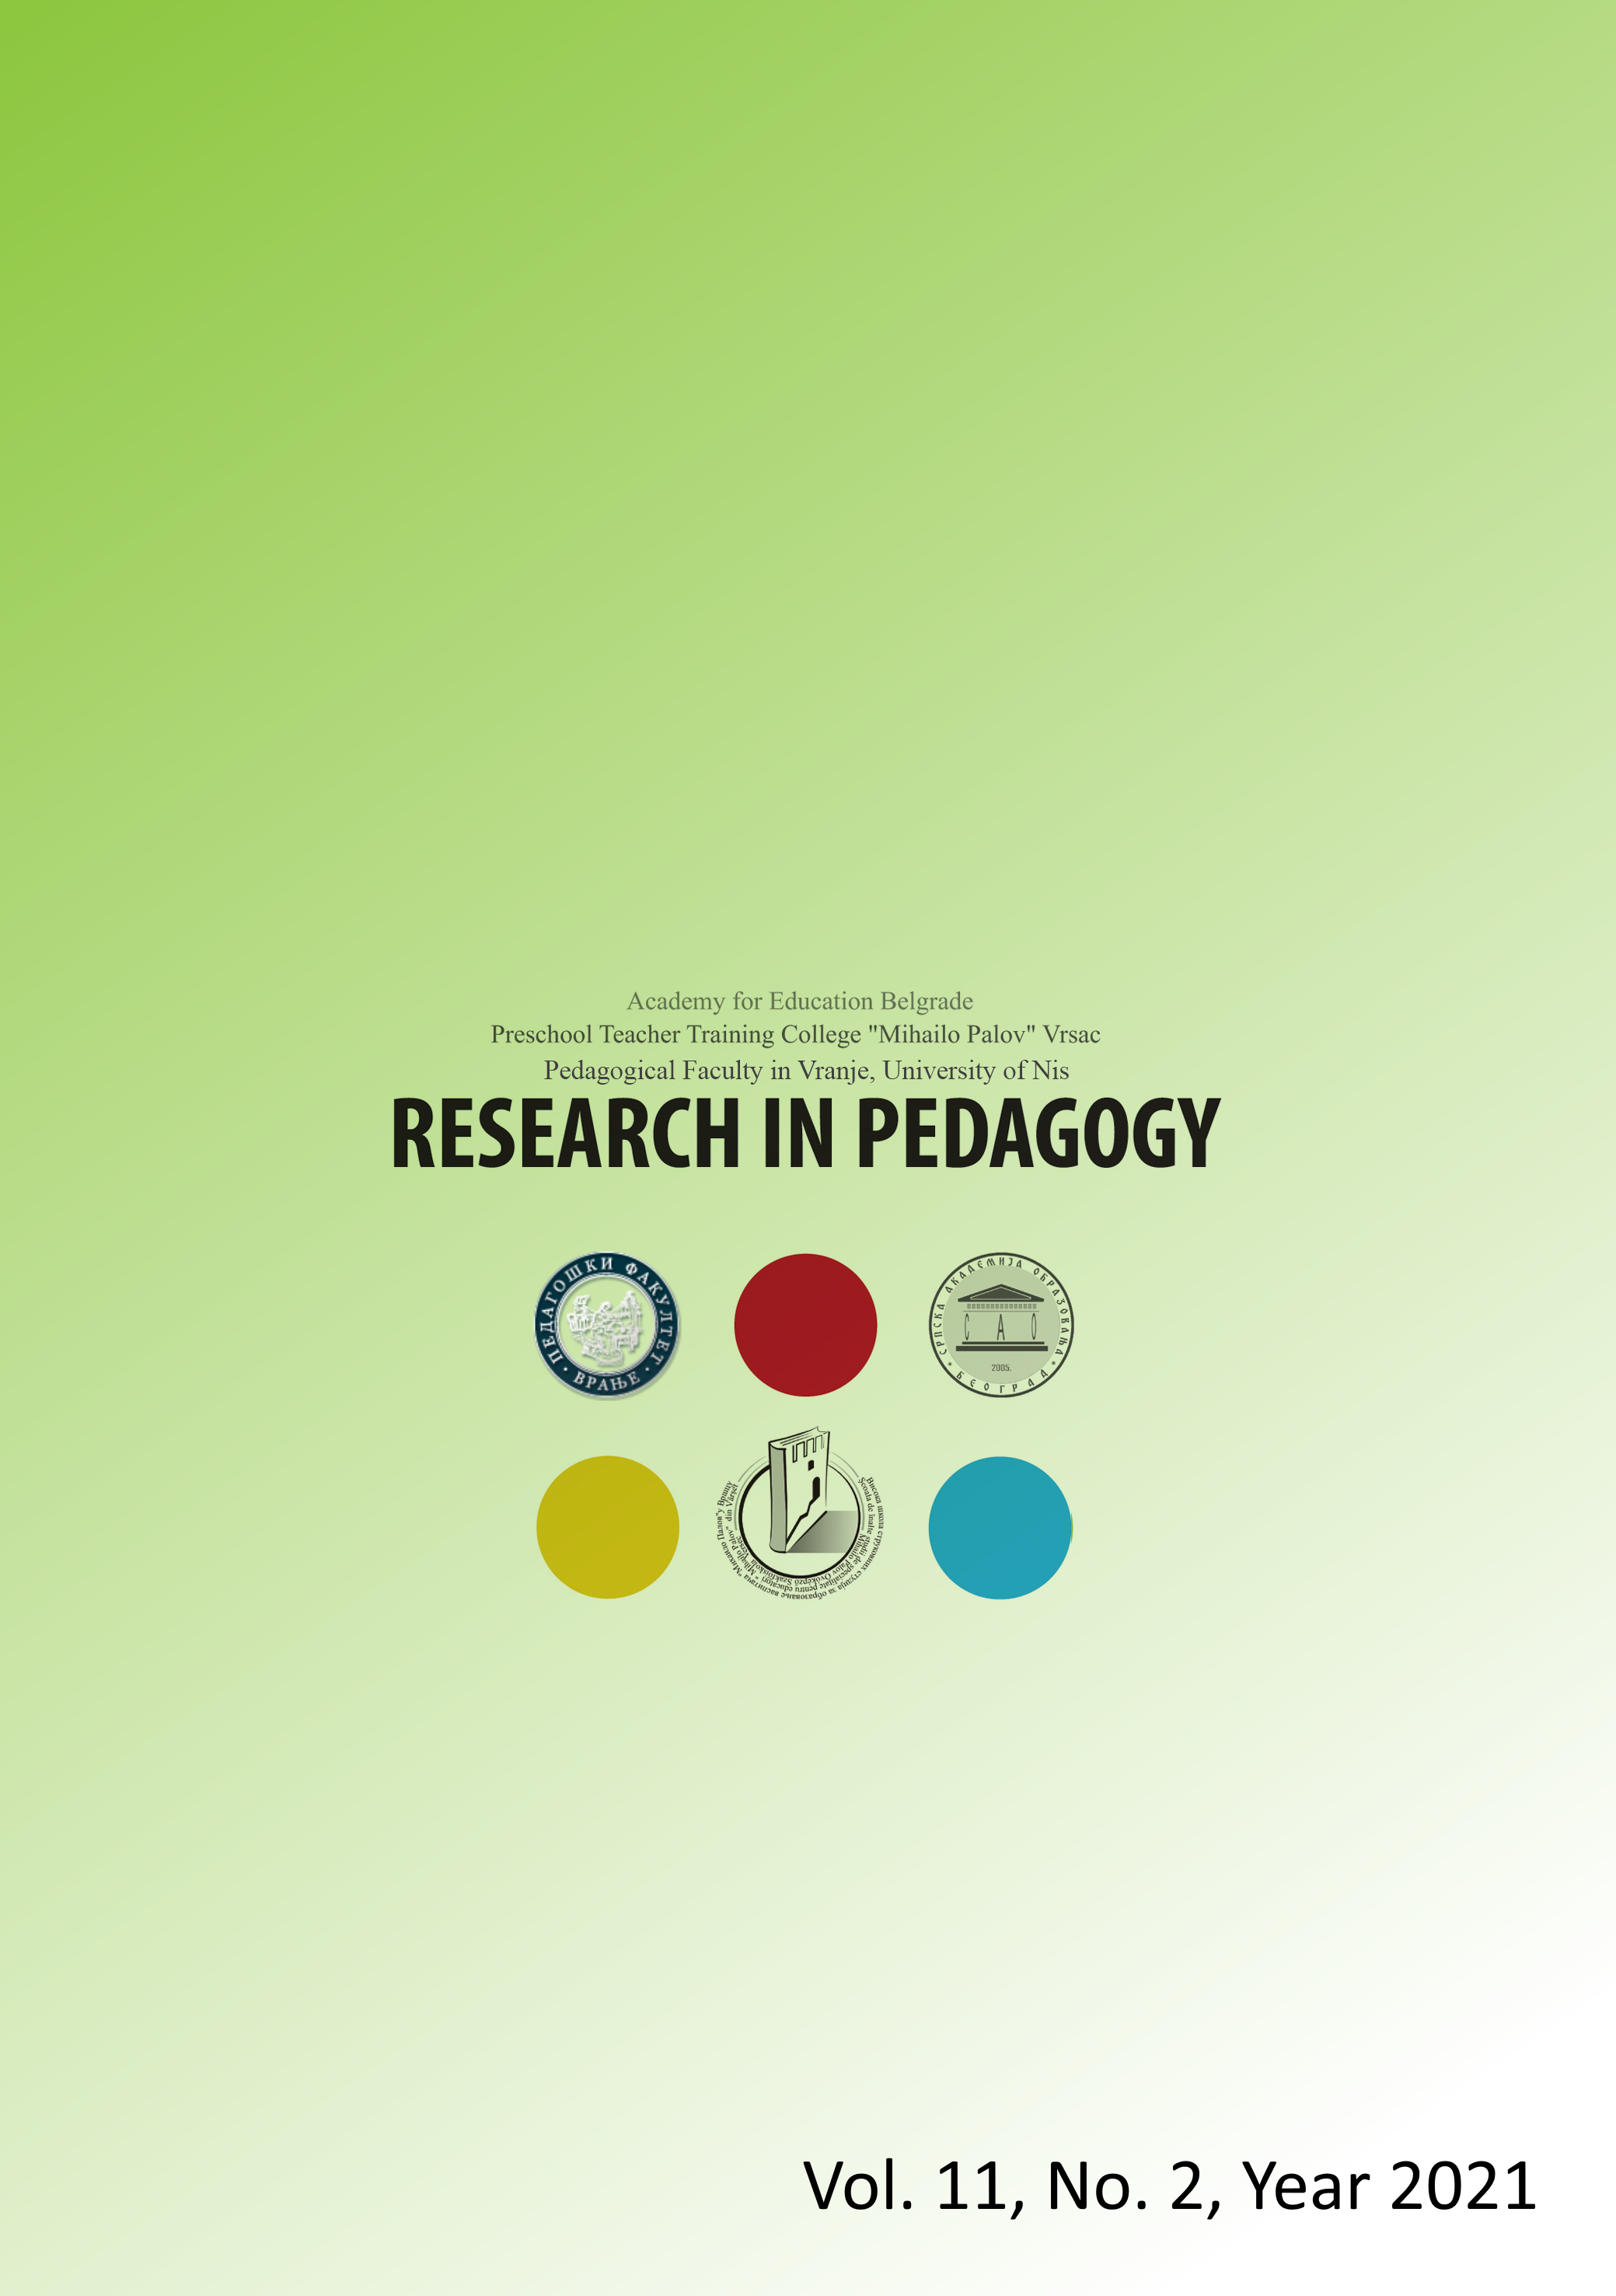 INVESTIGATION OF THE COMMUNICATION SKILLS, PROFESSIONAL SENIORITY, SCHOOL STAGE AND GENDER AS PREDICTORS OF TEACHERS' CLASSROOM MANAGEMENT STYLES Cover Image